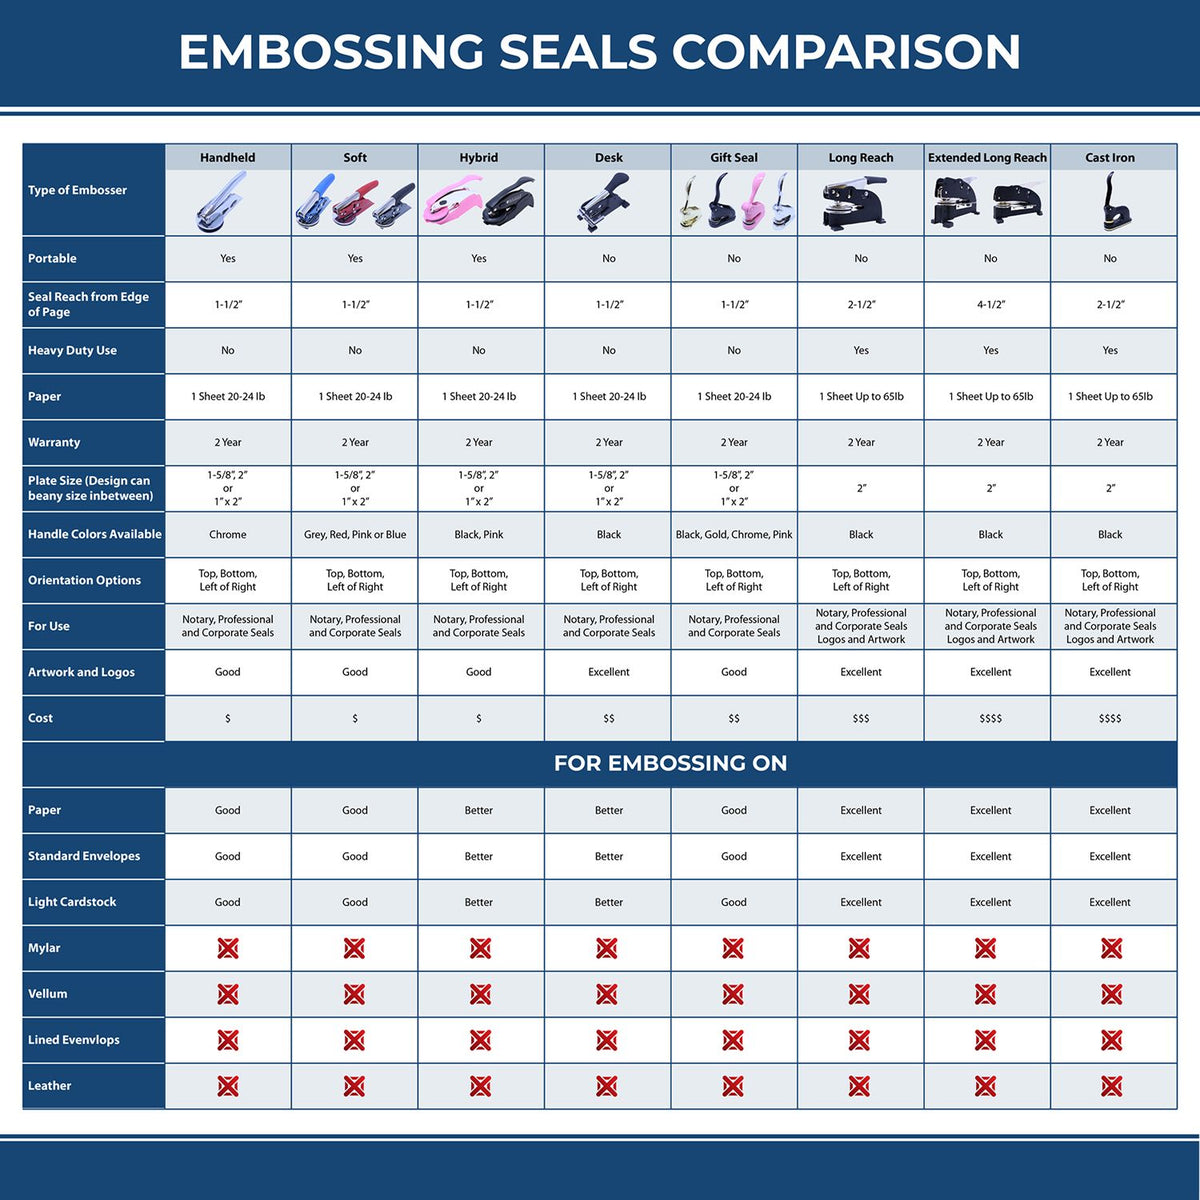 A comparison chart for the different types of mount models available for the Handheld Maryland Professional Engineer Embosser.